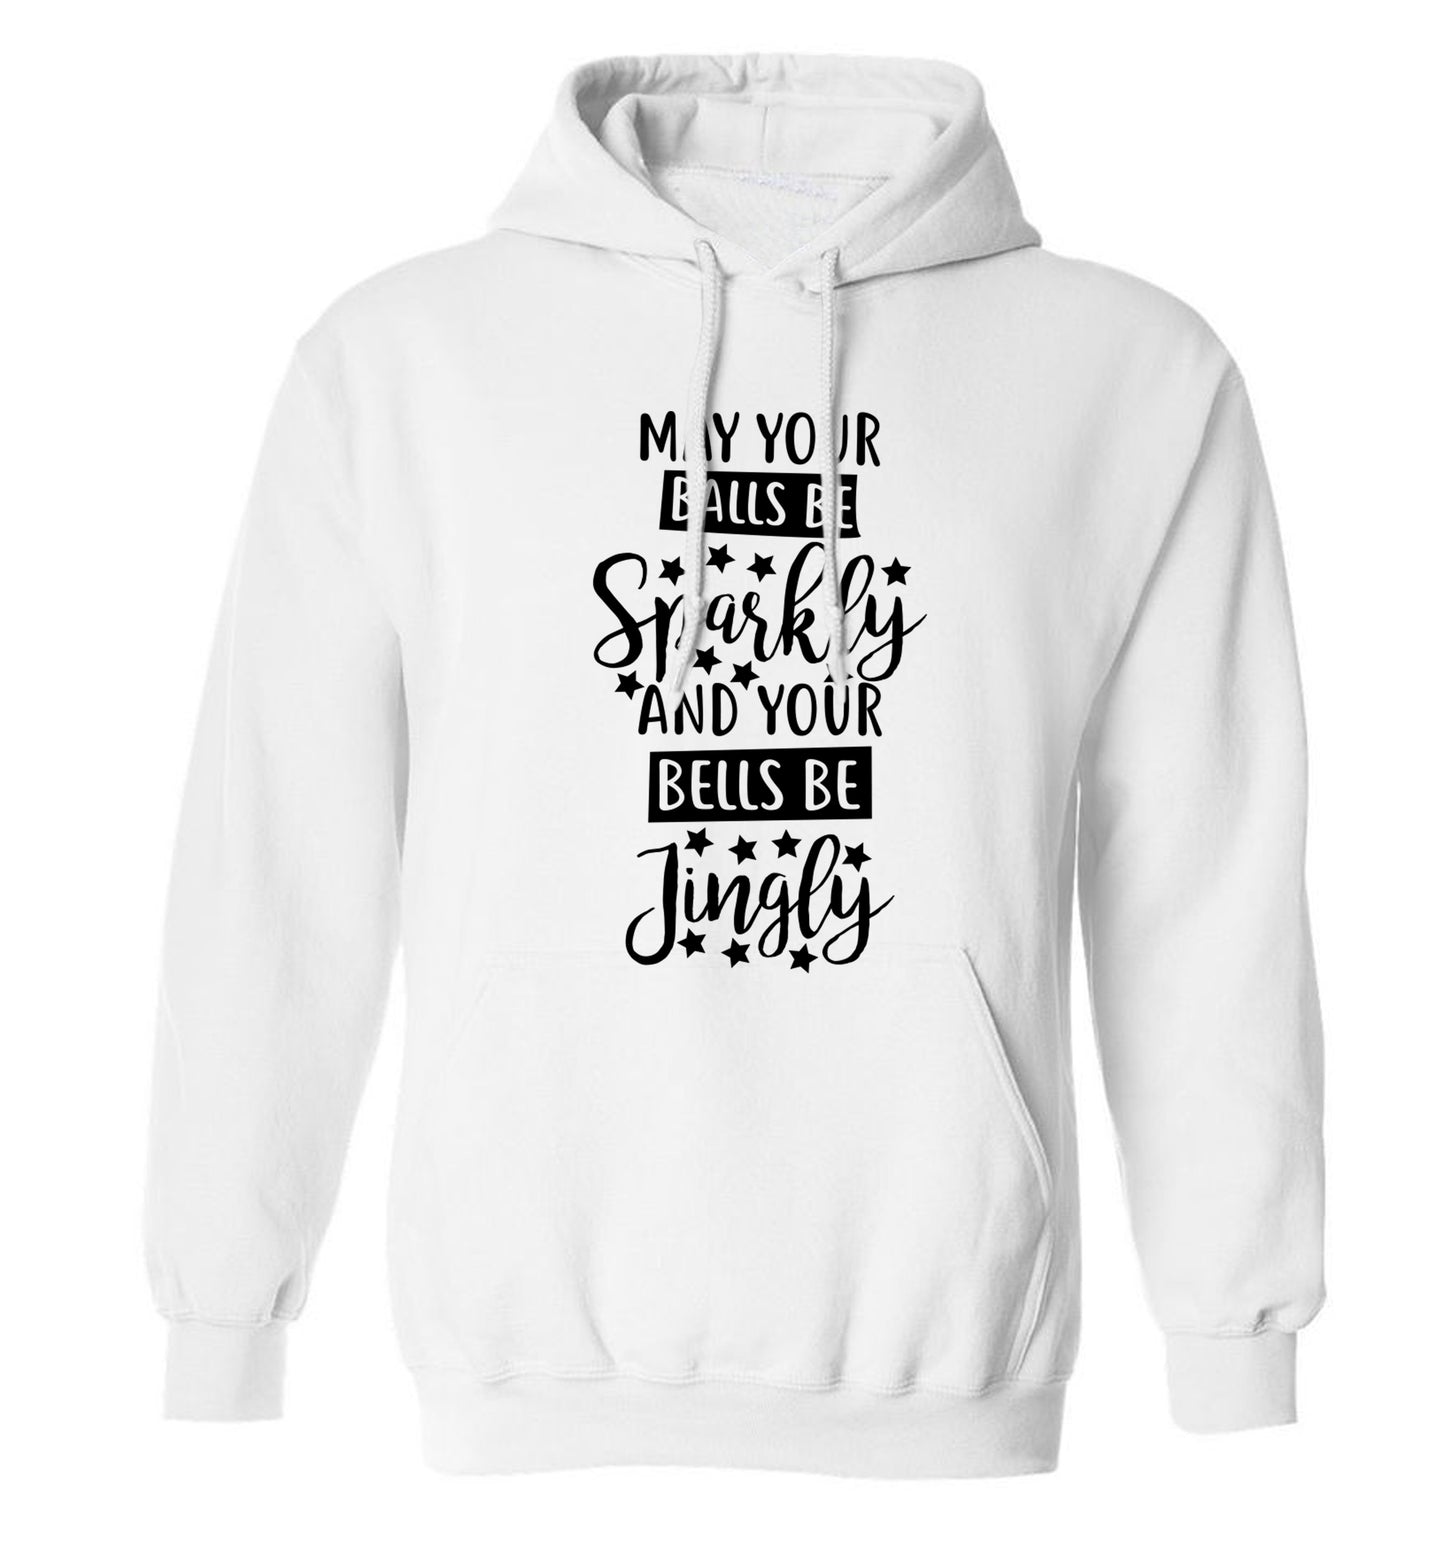 May your balls be sparkly and your bells be jingly adults unisex white hoodie 2XL